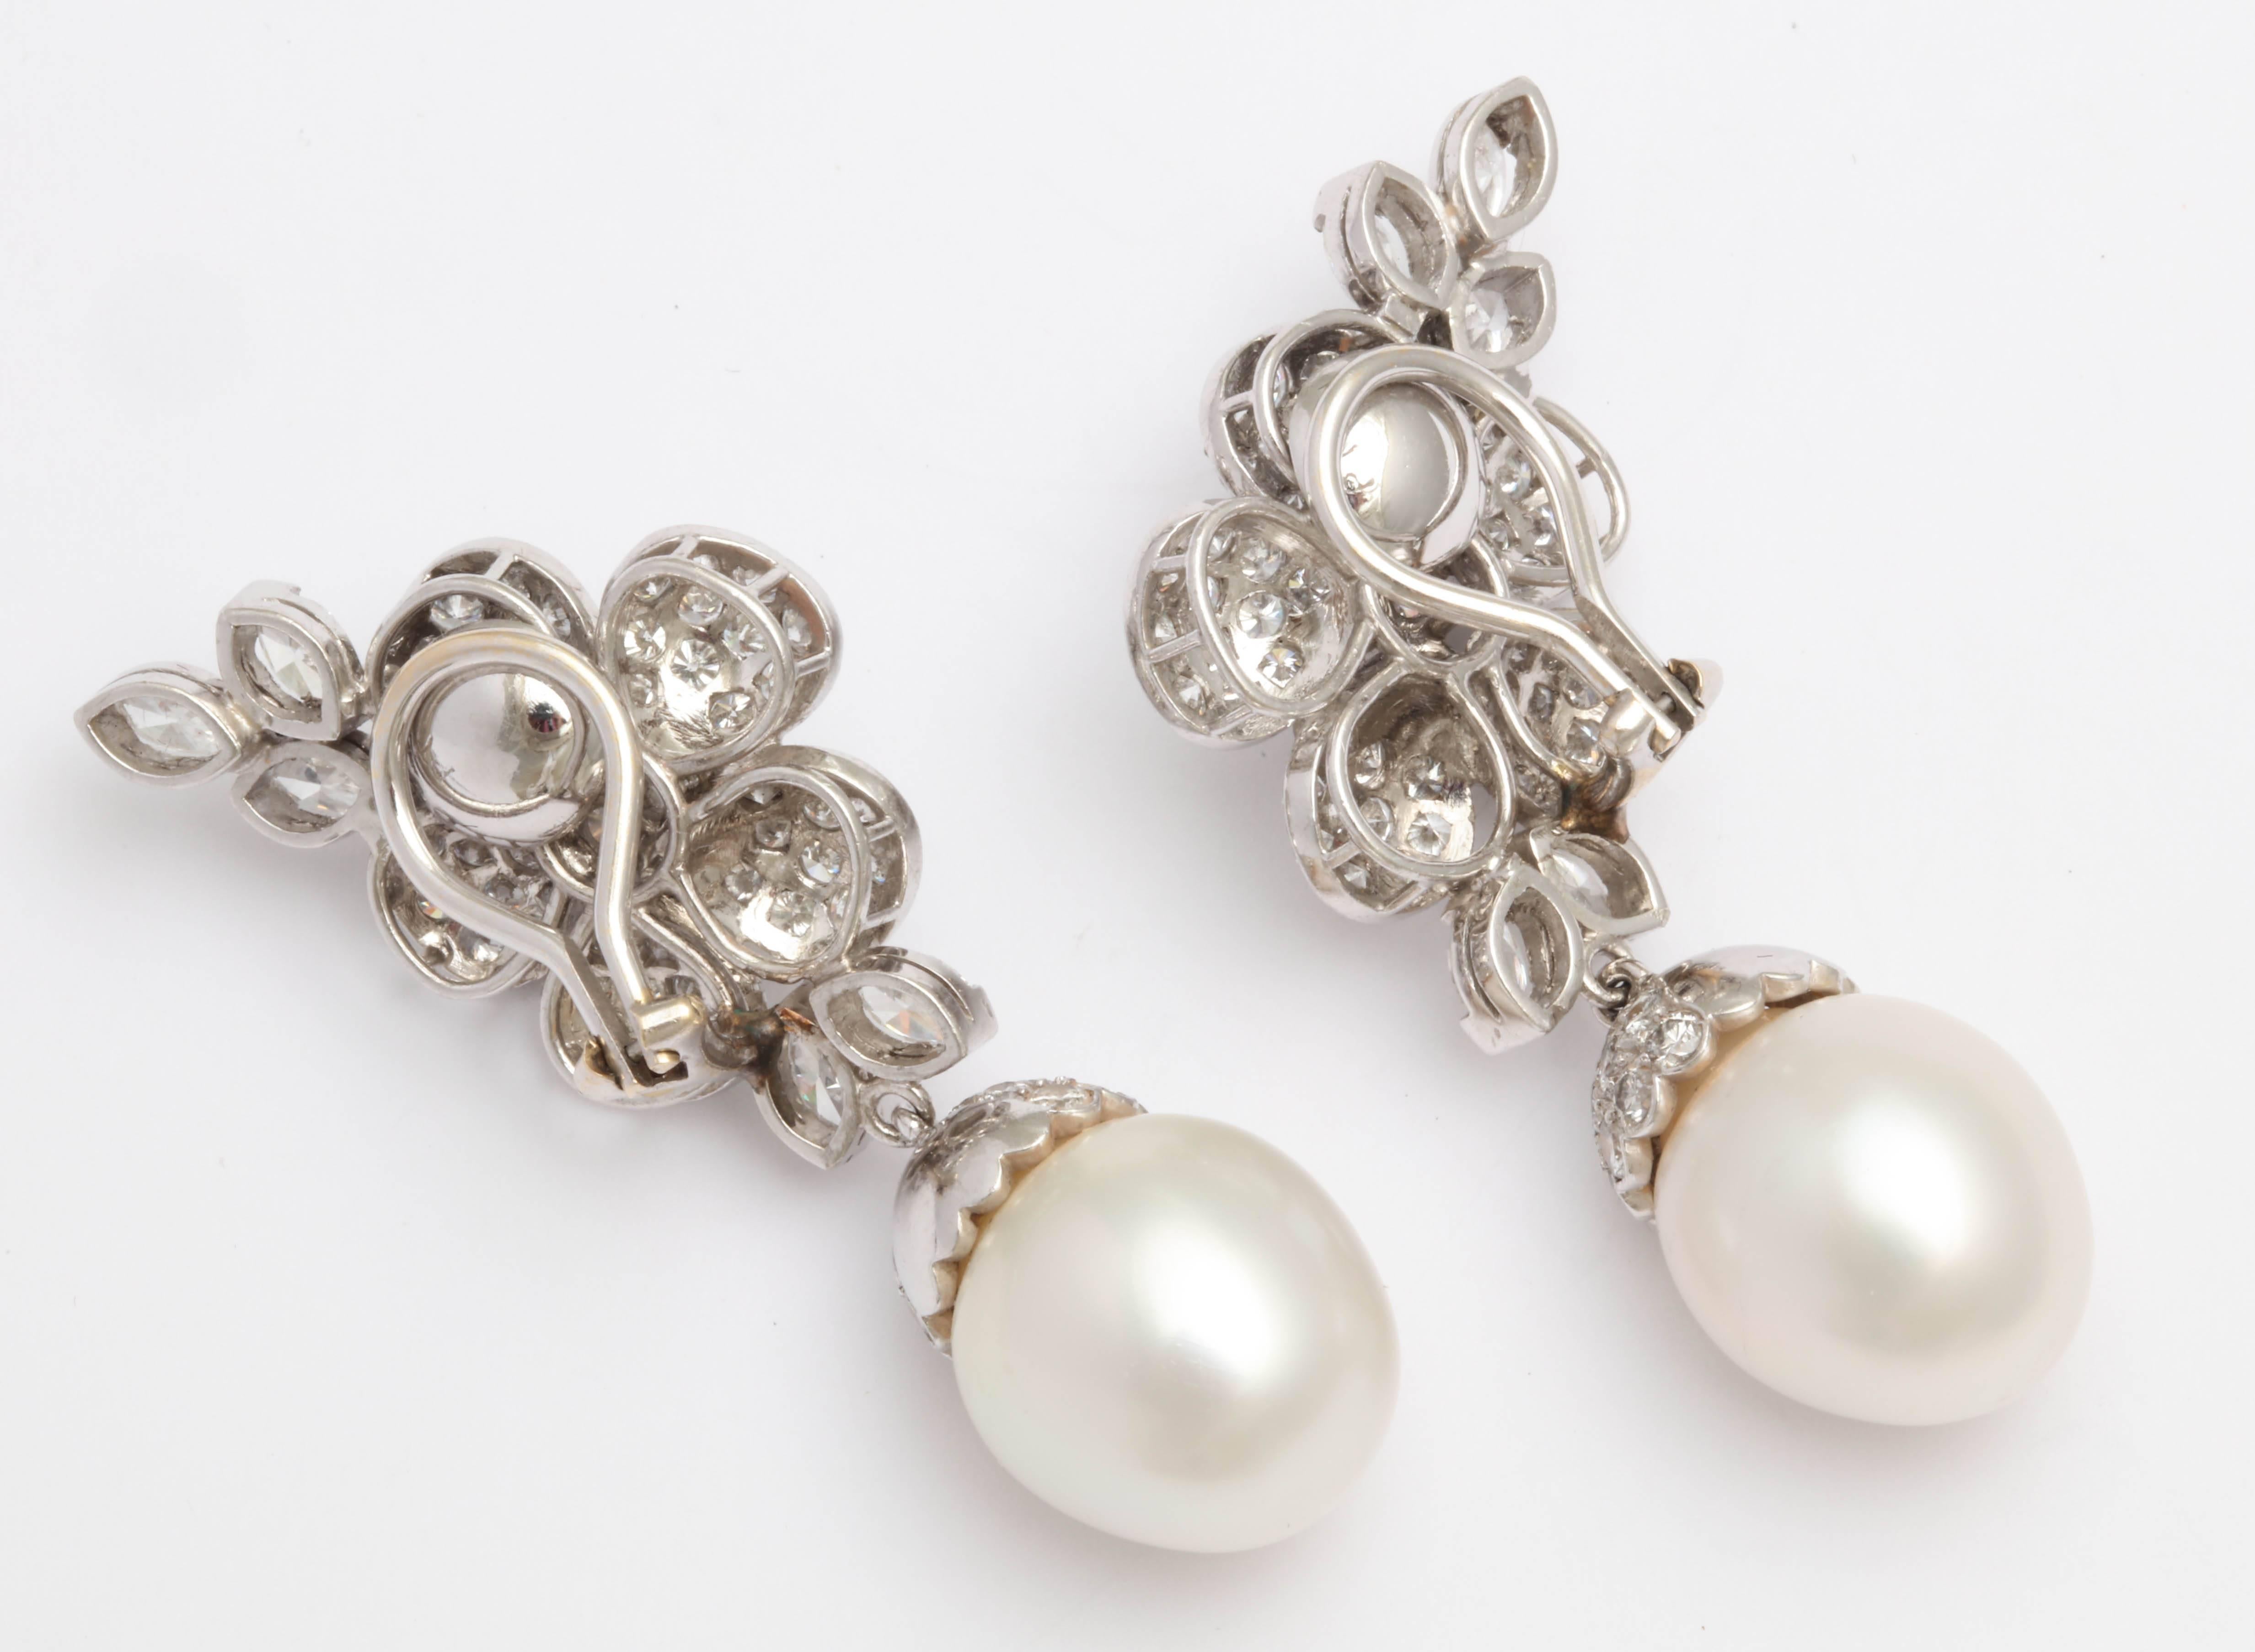 Great pair of Diamond capped  South Sea Pearl & Floral  Diamond Earrings.
Very chic & ultra sexy.  A very sophisticated look
Tops are a central 5 petal flower with a central Diamond Rosette and Diamond Leaves to accentuate the length & soften the